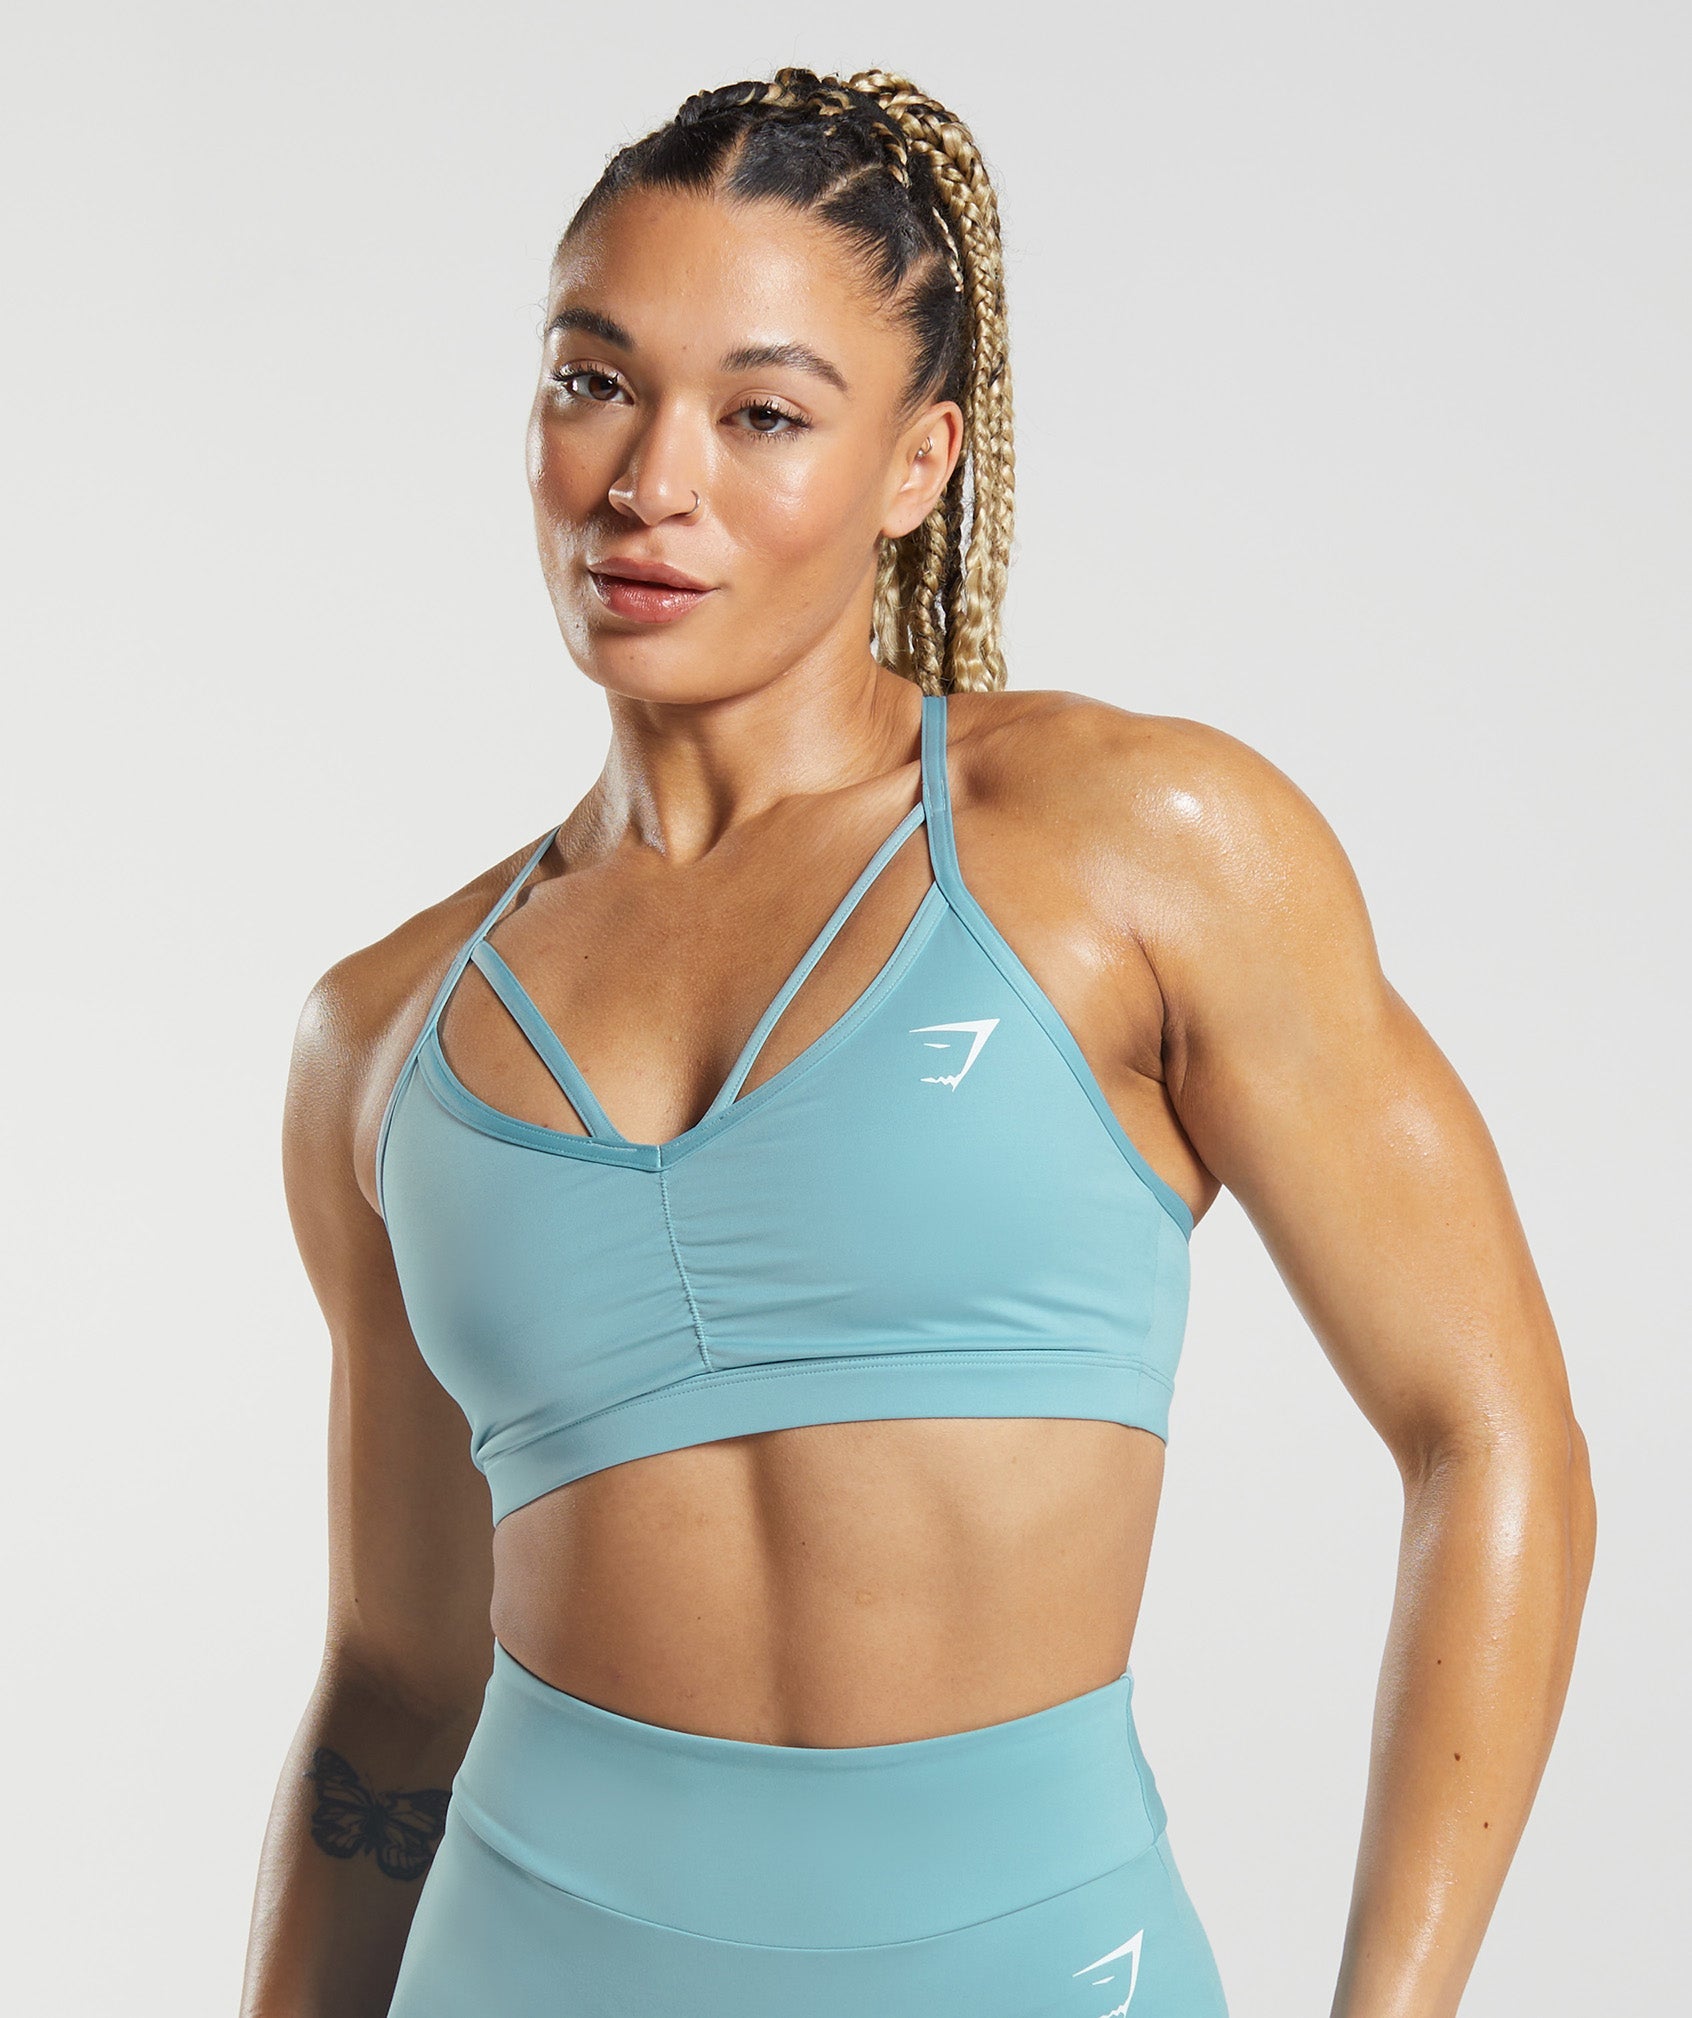 Clarks Village - WIN ! Prize Time Award winning ShockAbsorber sports  bras from Wonderbra at Clarks Village. Win a sports bra of your choice by  'LIKING' this post. Discover 15% Off all